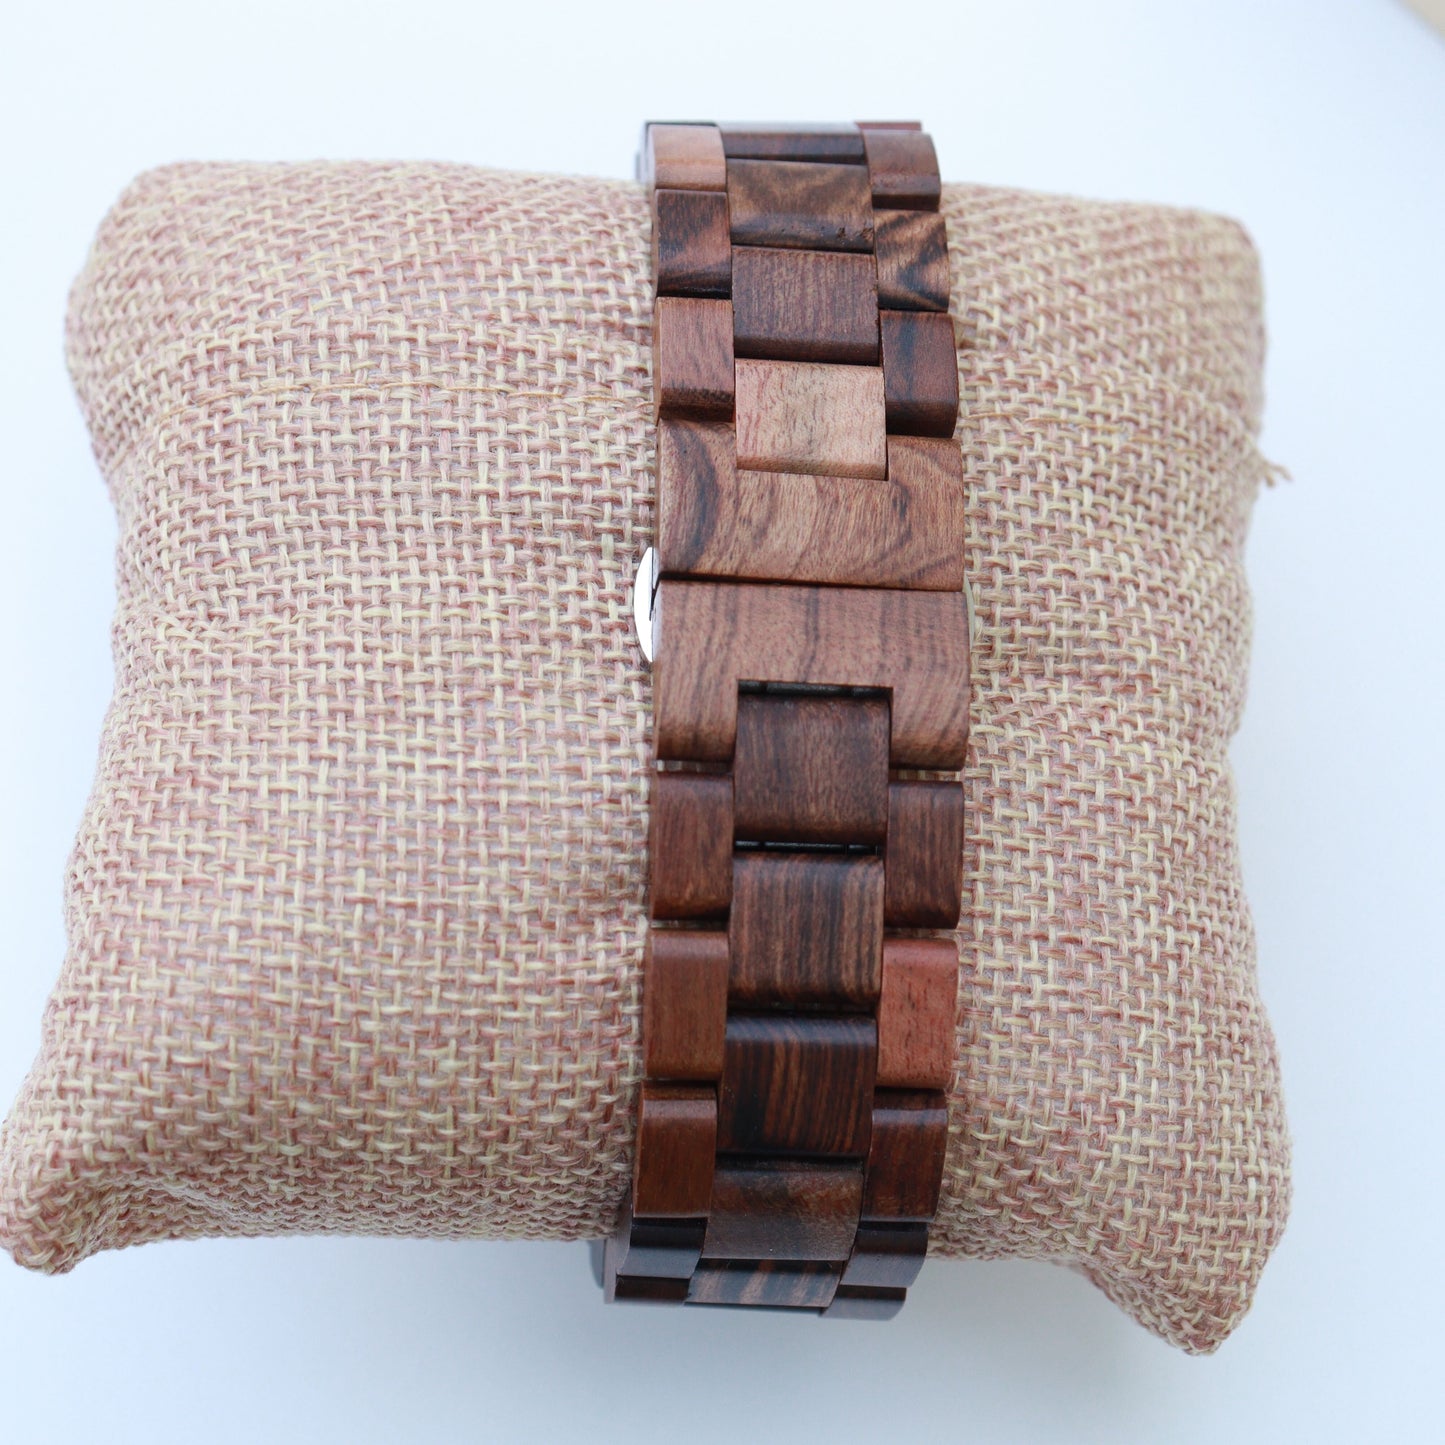 Elevate WoodenWatch Mechanical For Men and Women Stainless Steel Tigerwood